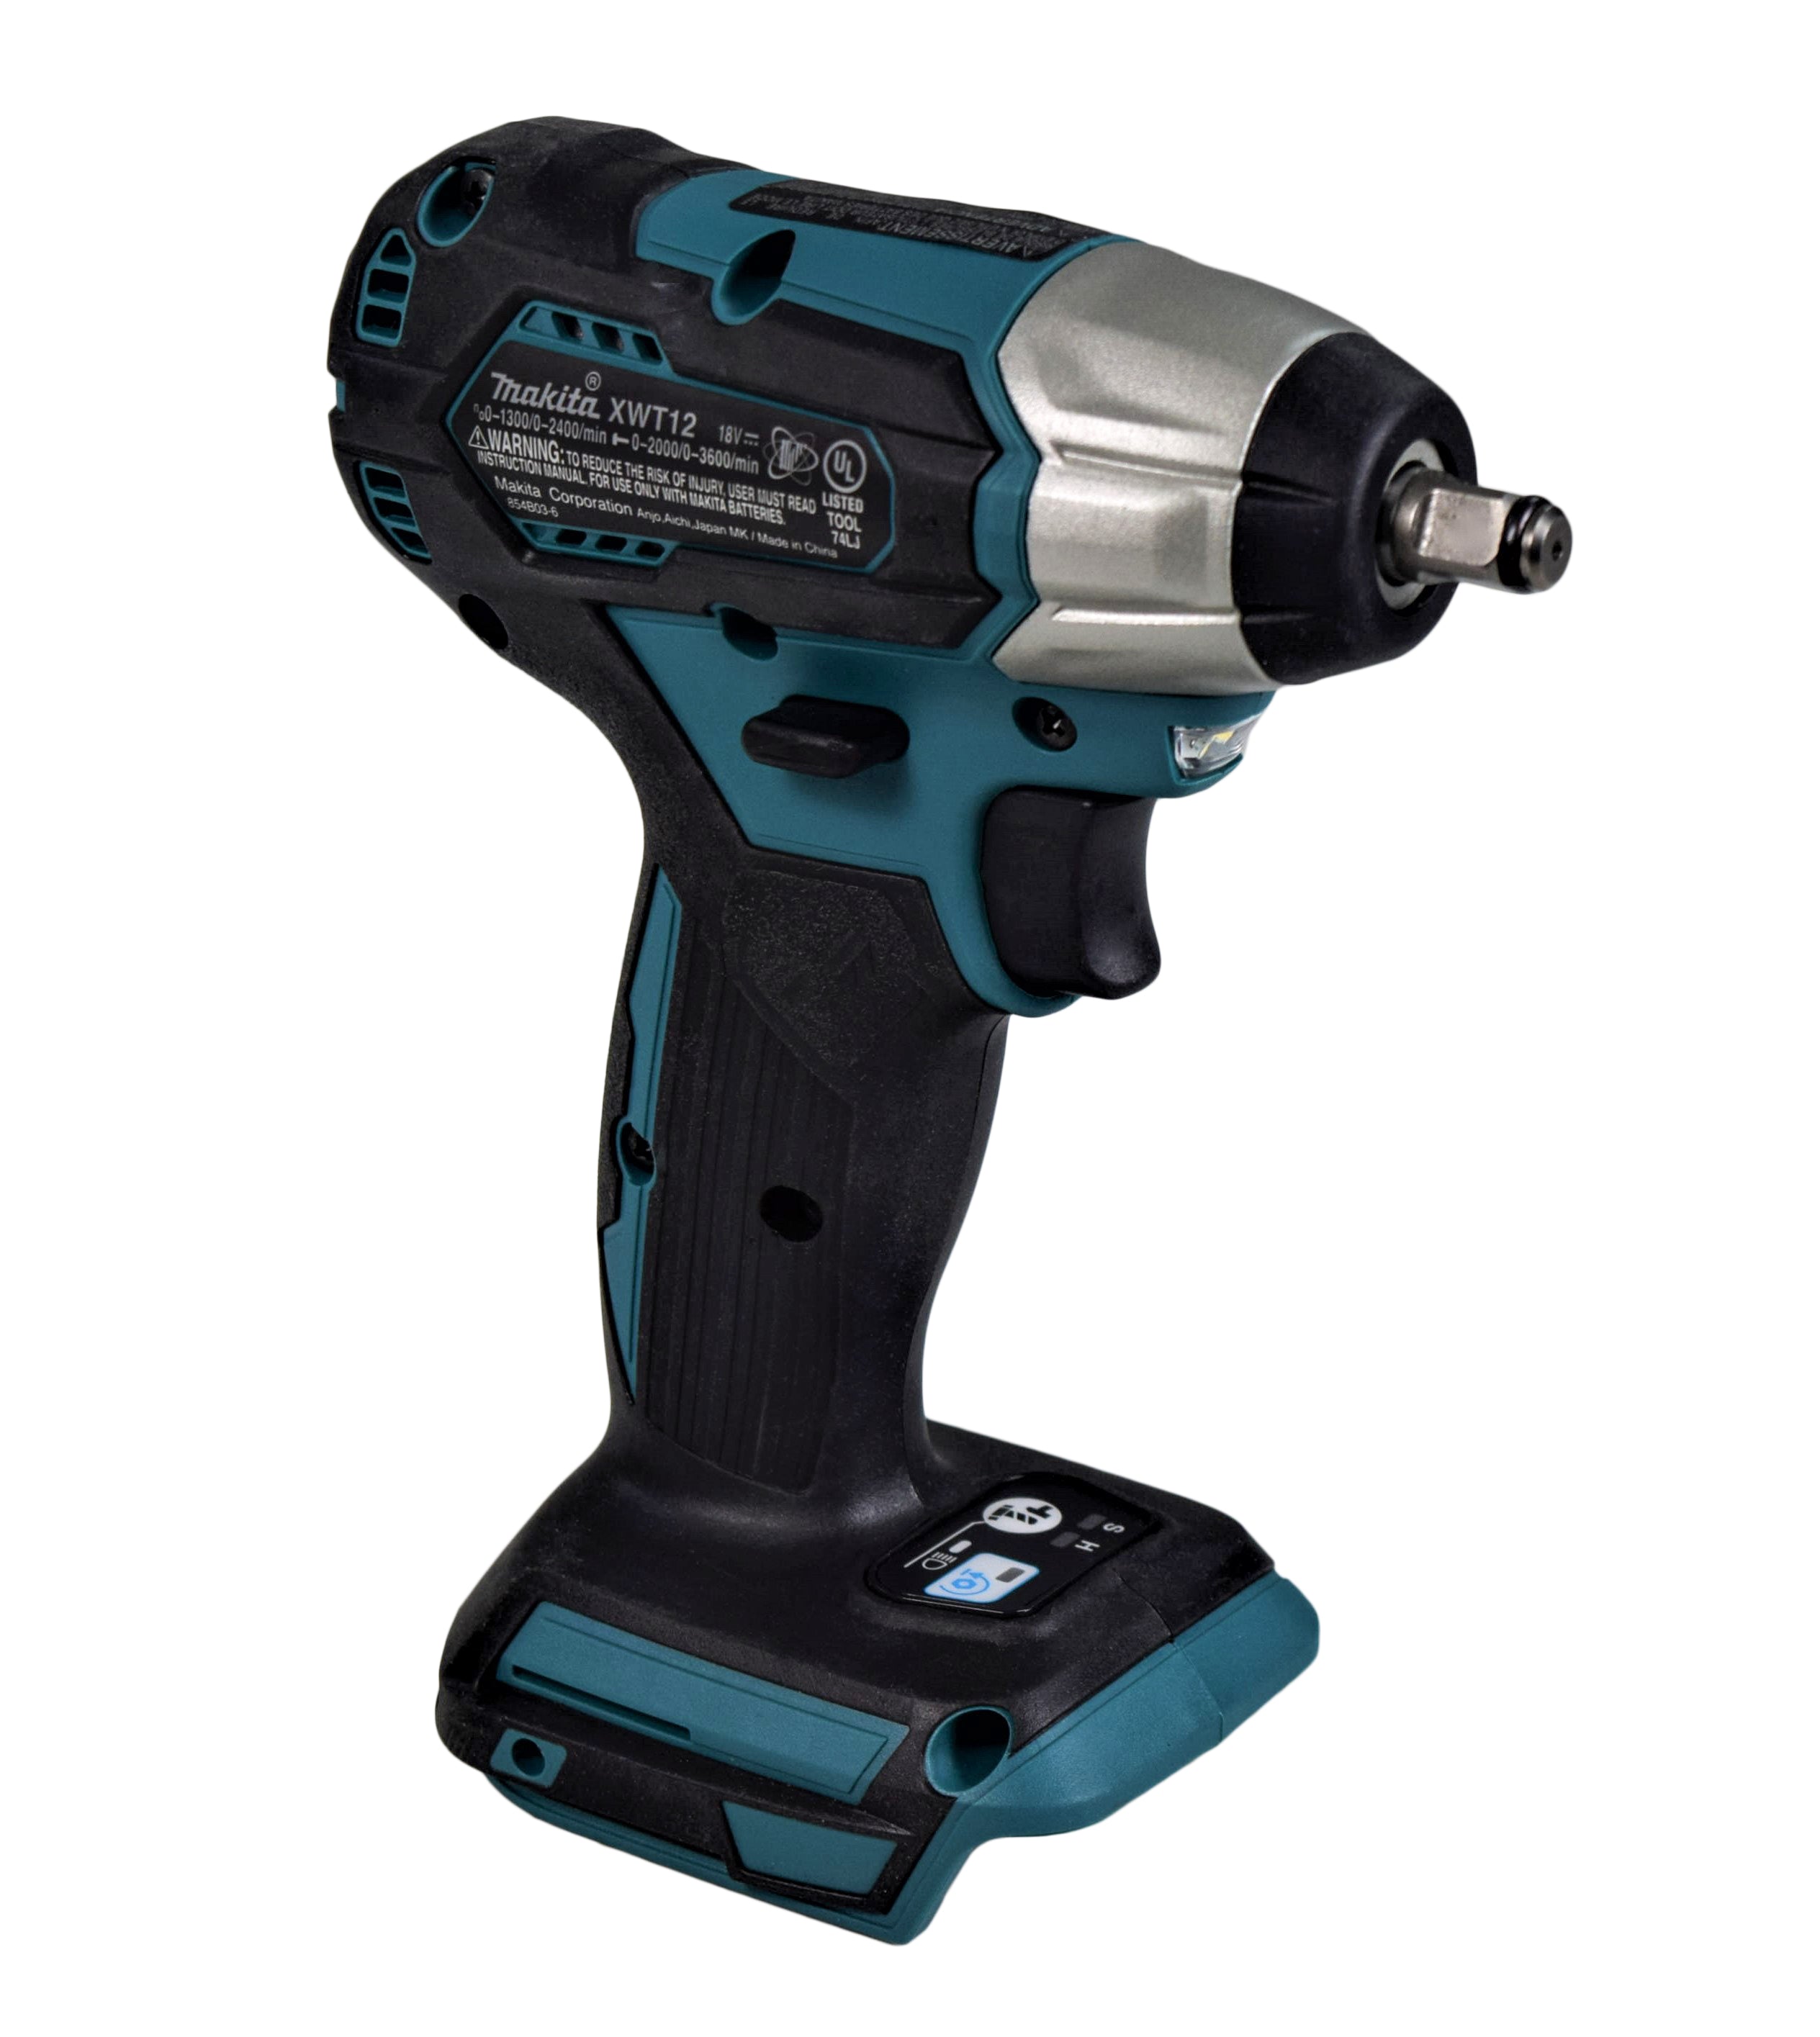 Makita-XWT12Z-18V-LXT-Lithium-Ion-Sub-Compact-Brushless-Cordless-3-8-inch-Sq.-Drive-Impact-Wrench-Tool-Only-image-3